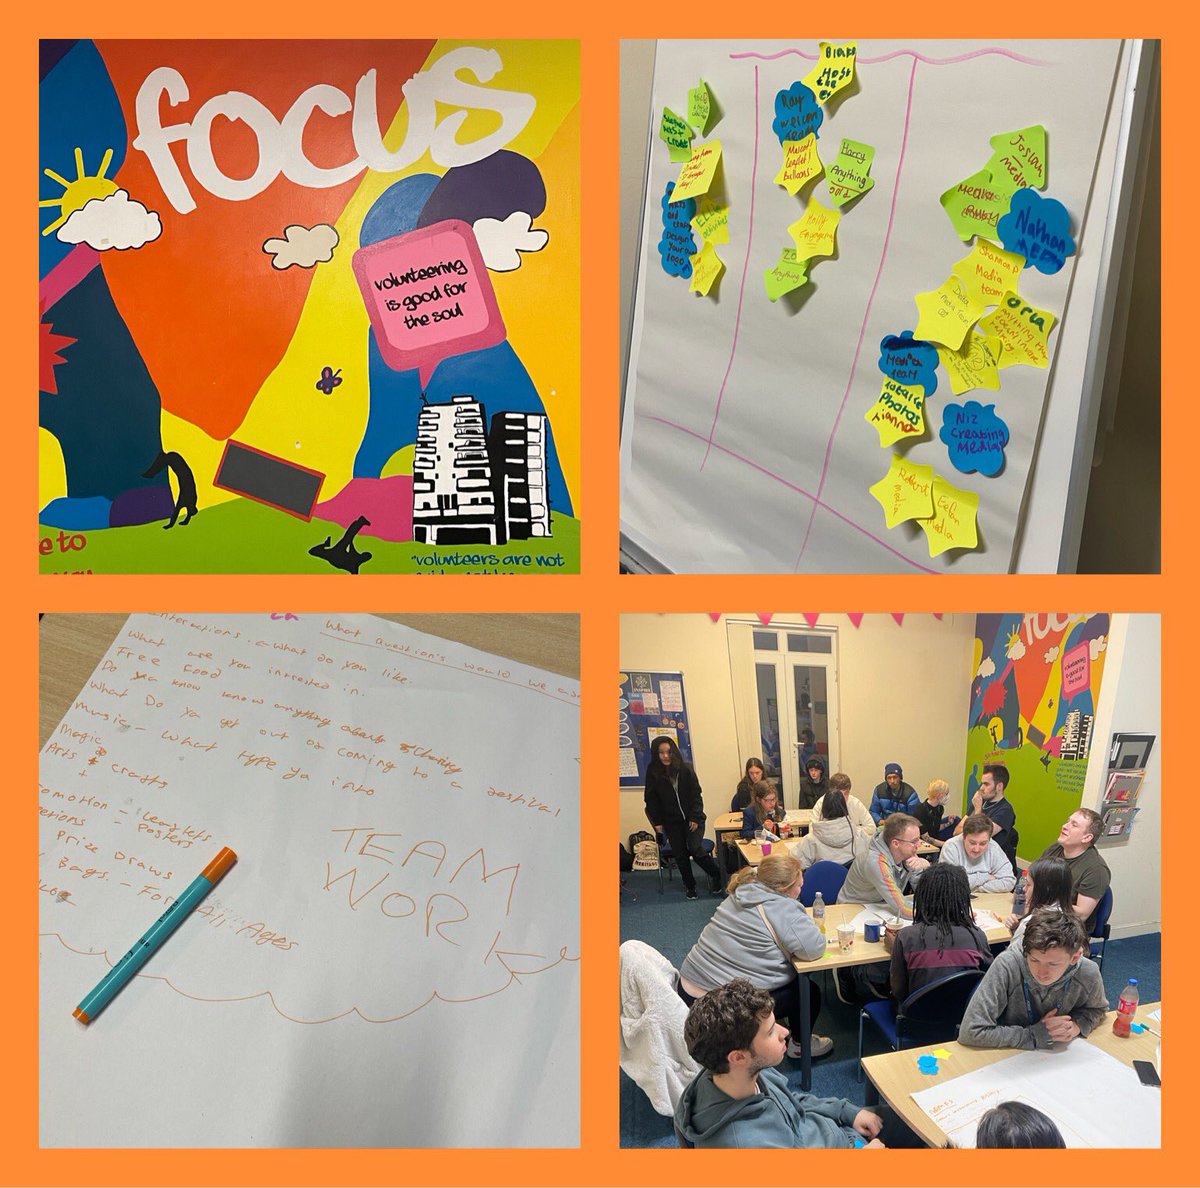 @FOCUScharity @DocMediaCentre I enjoyed supporting the session and looking forward to popping into your exhibition in April!